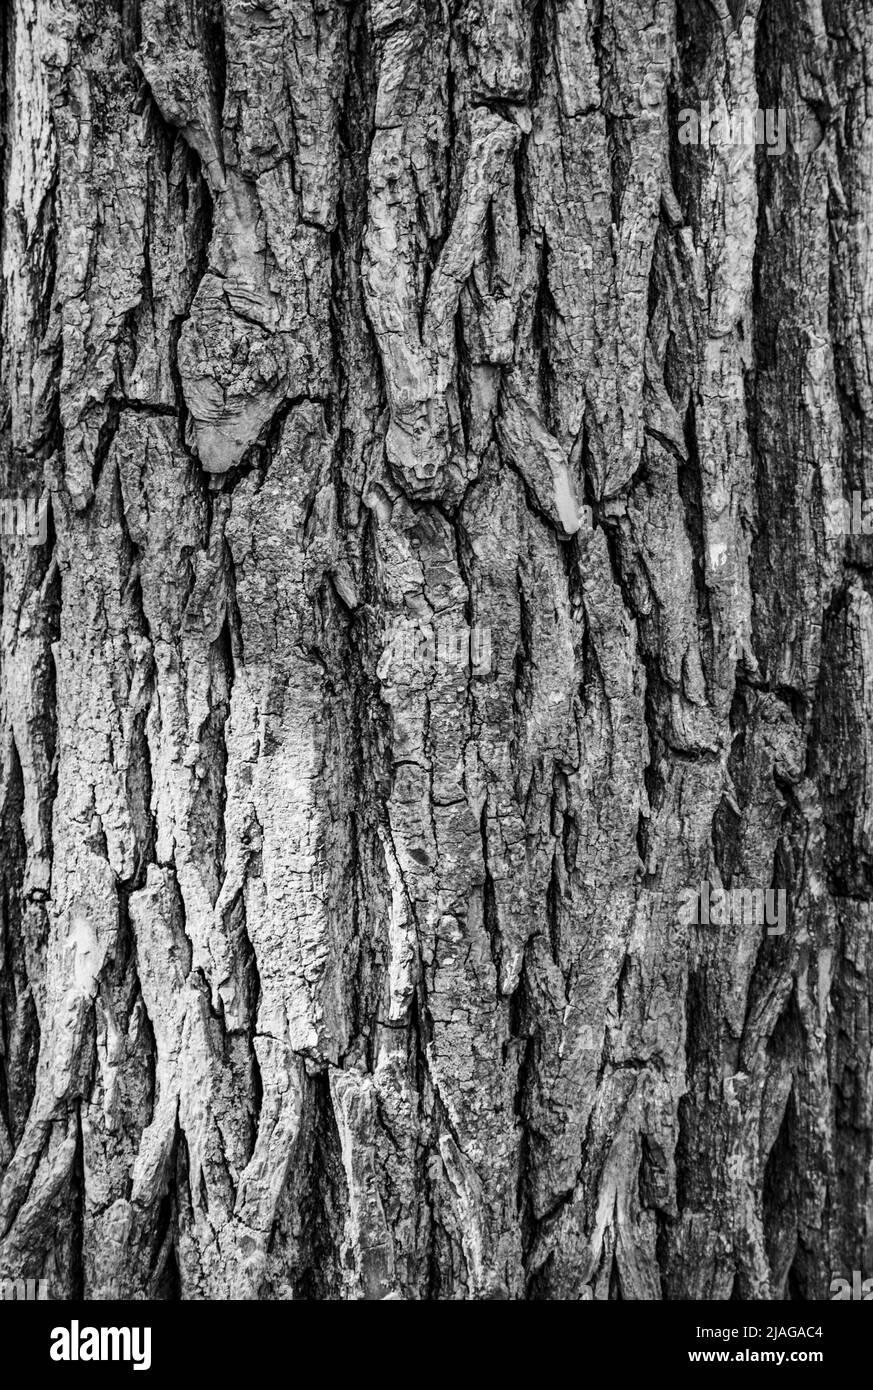 Close up shot of patterns on a tree trunk. can be used as a background, wall paper, texture, pattern, or abstract - stock photography Stock Photo